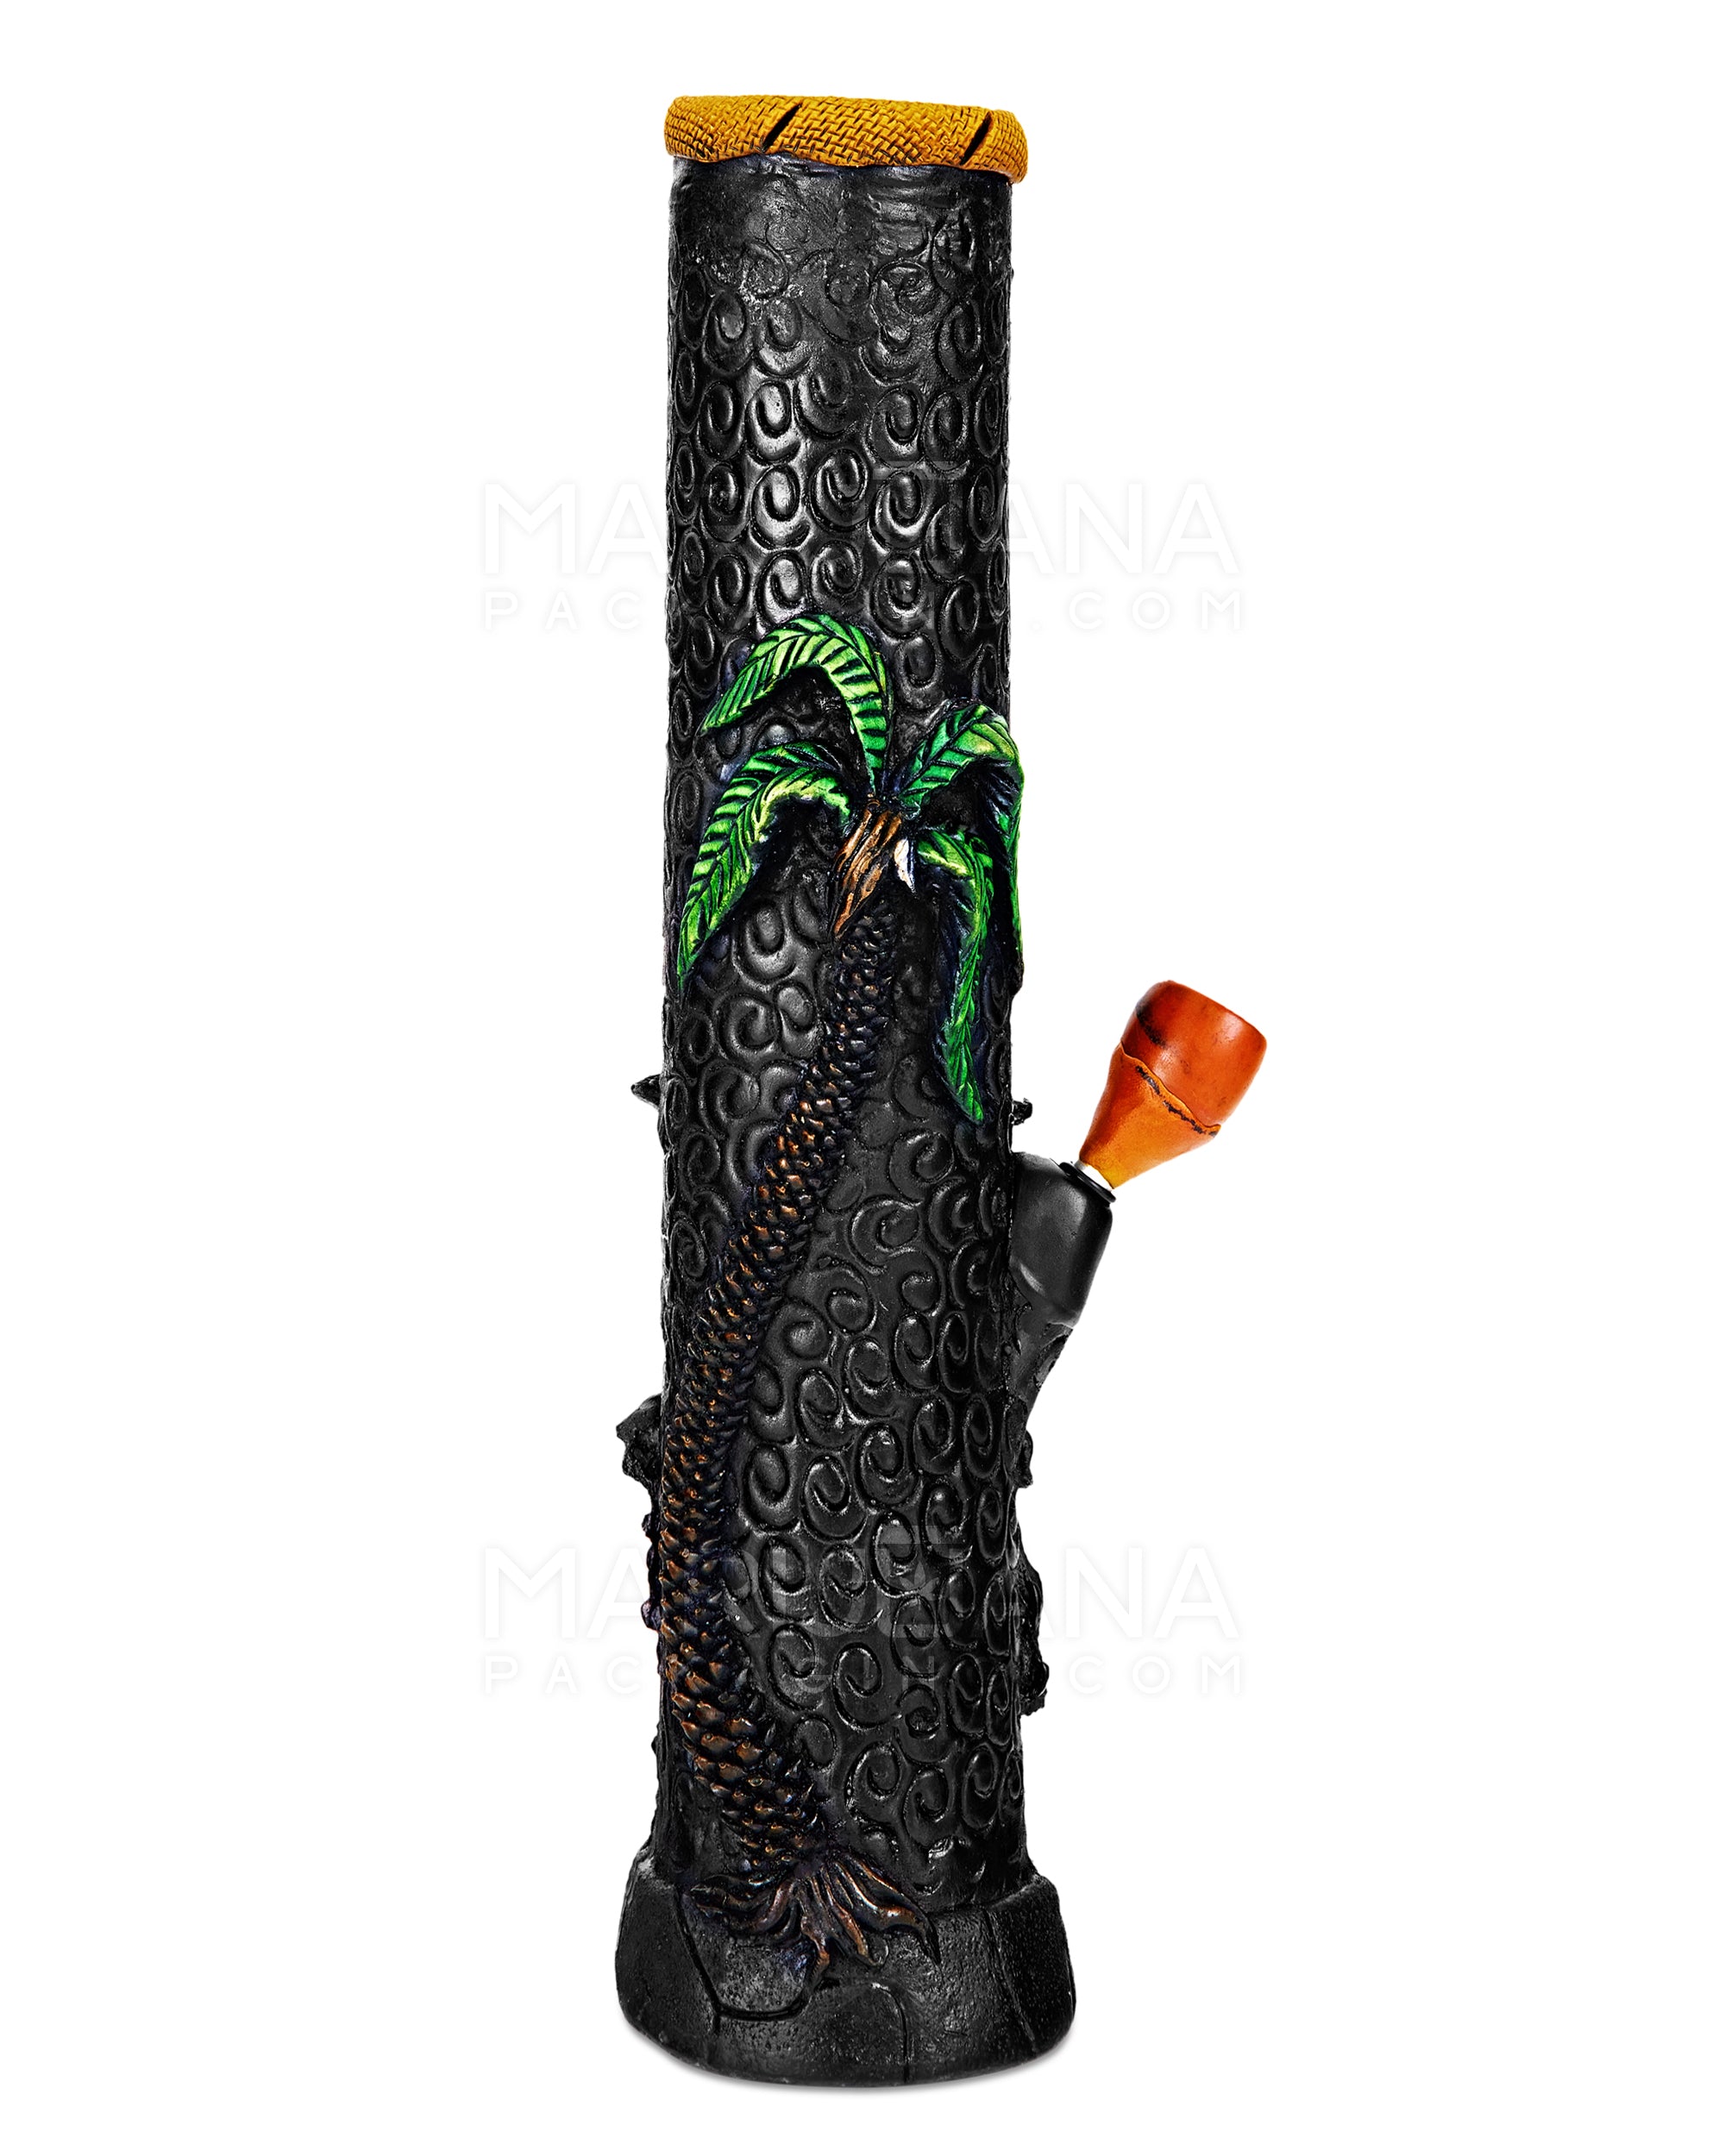 Straight Neck 420 Rasta Leaf Painted Wood Water Pipe w/ Iridescent Marble | 12in Tall - Wood Bowl - Rasta - 3